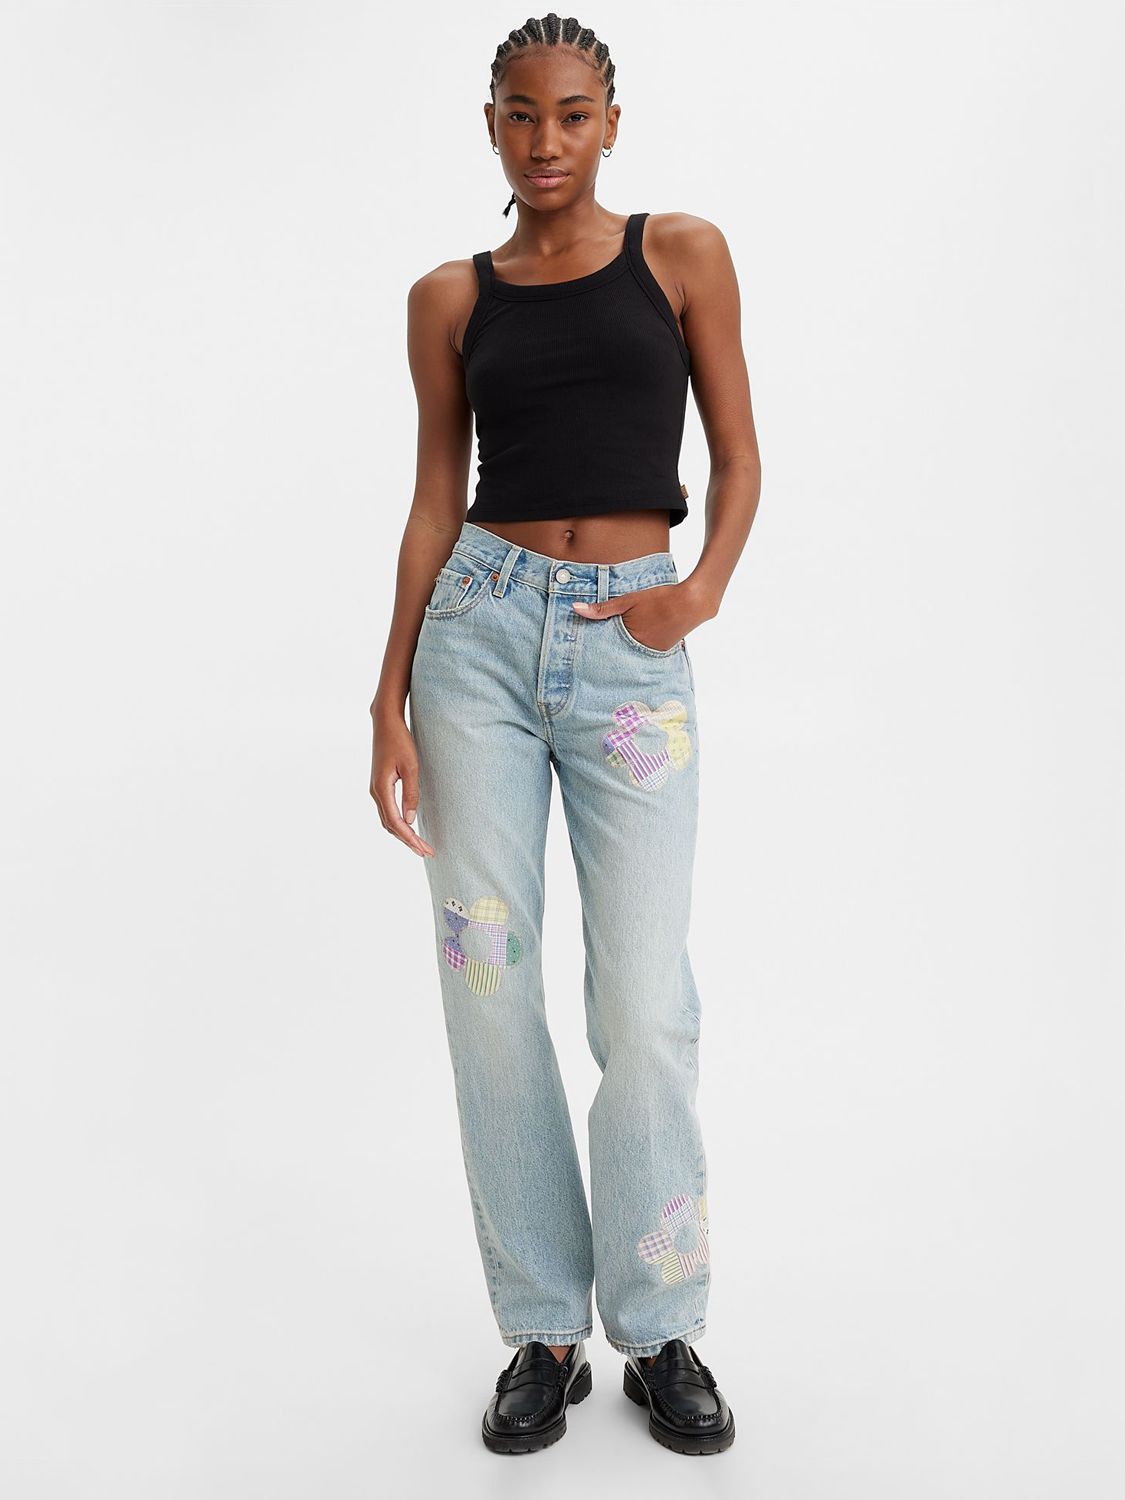 Levi's 501 Floral Patchwork Jeans, Fresh As A Daisy, 24